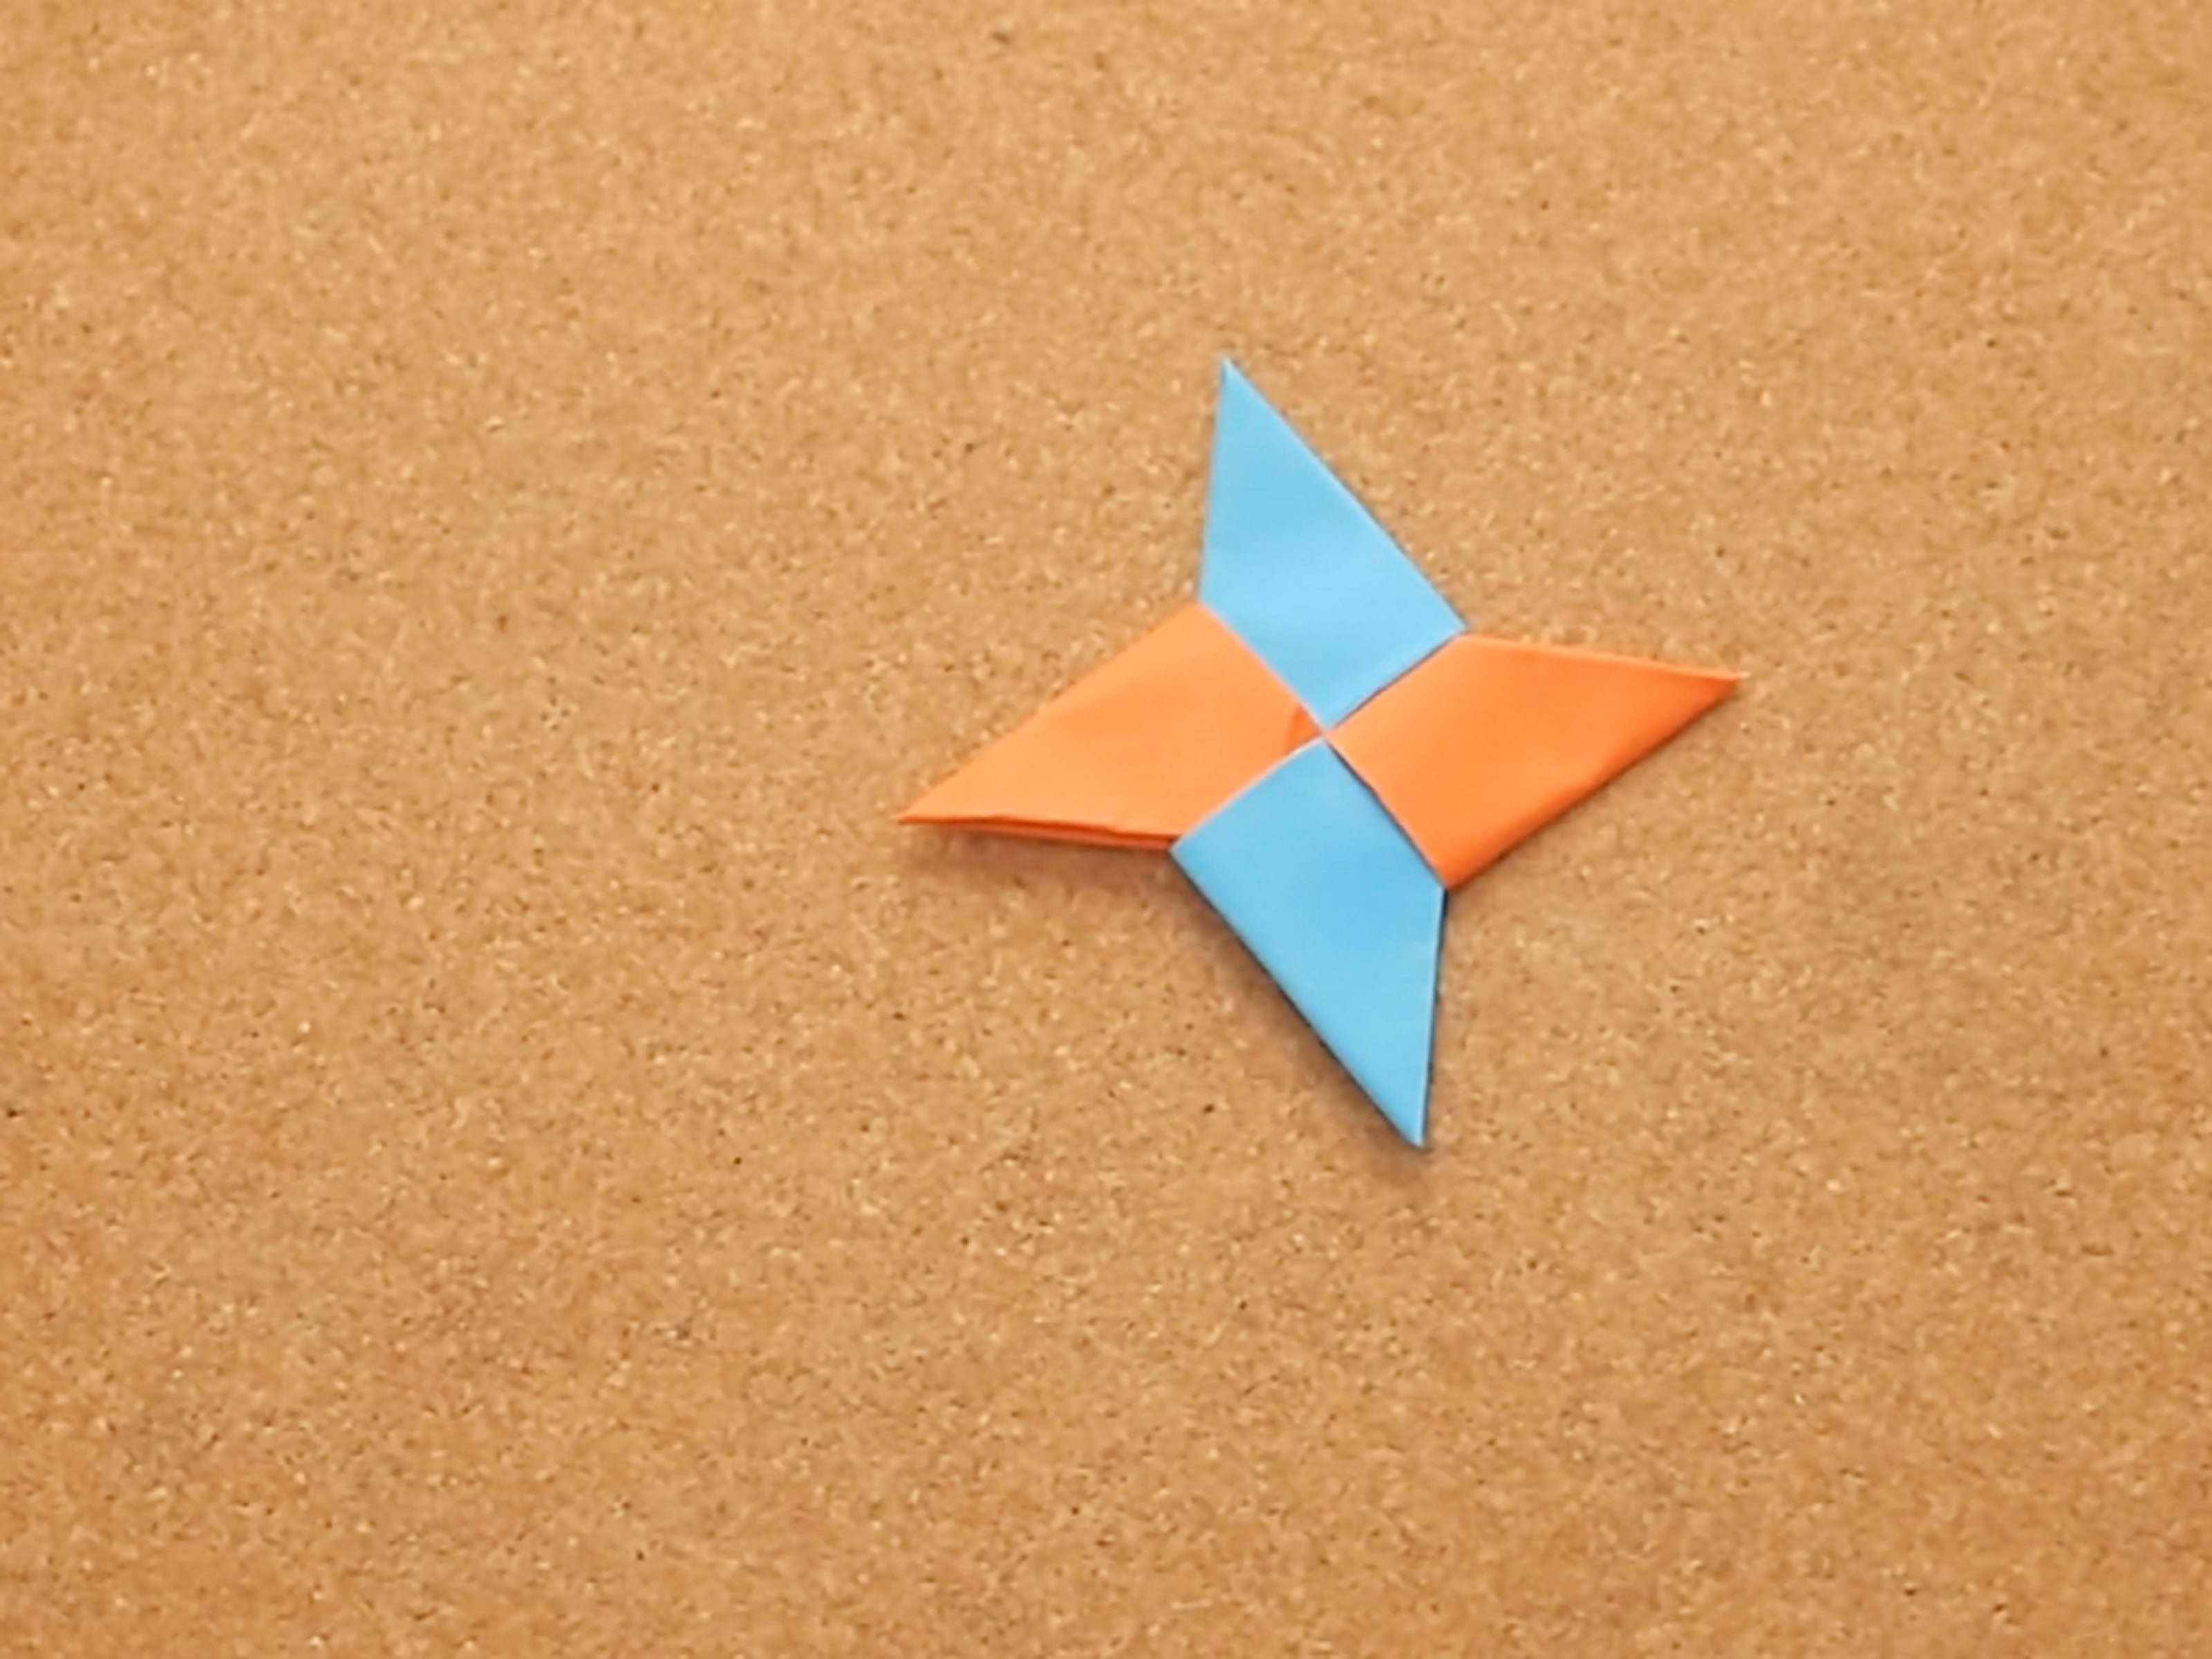 How To Make A Origami Ninja Star How To Make A Ninja Star From Square Paper With Pictures